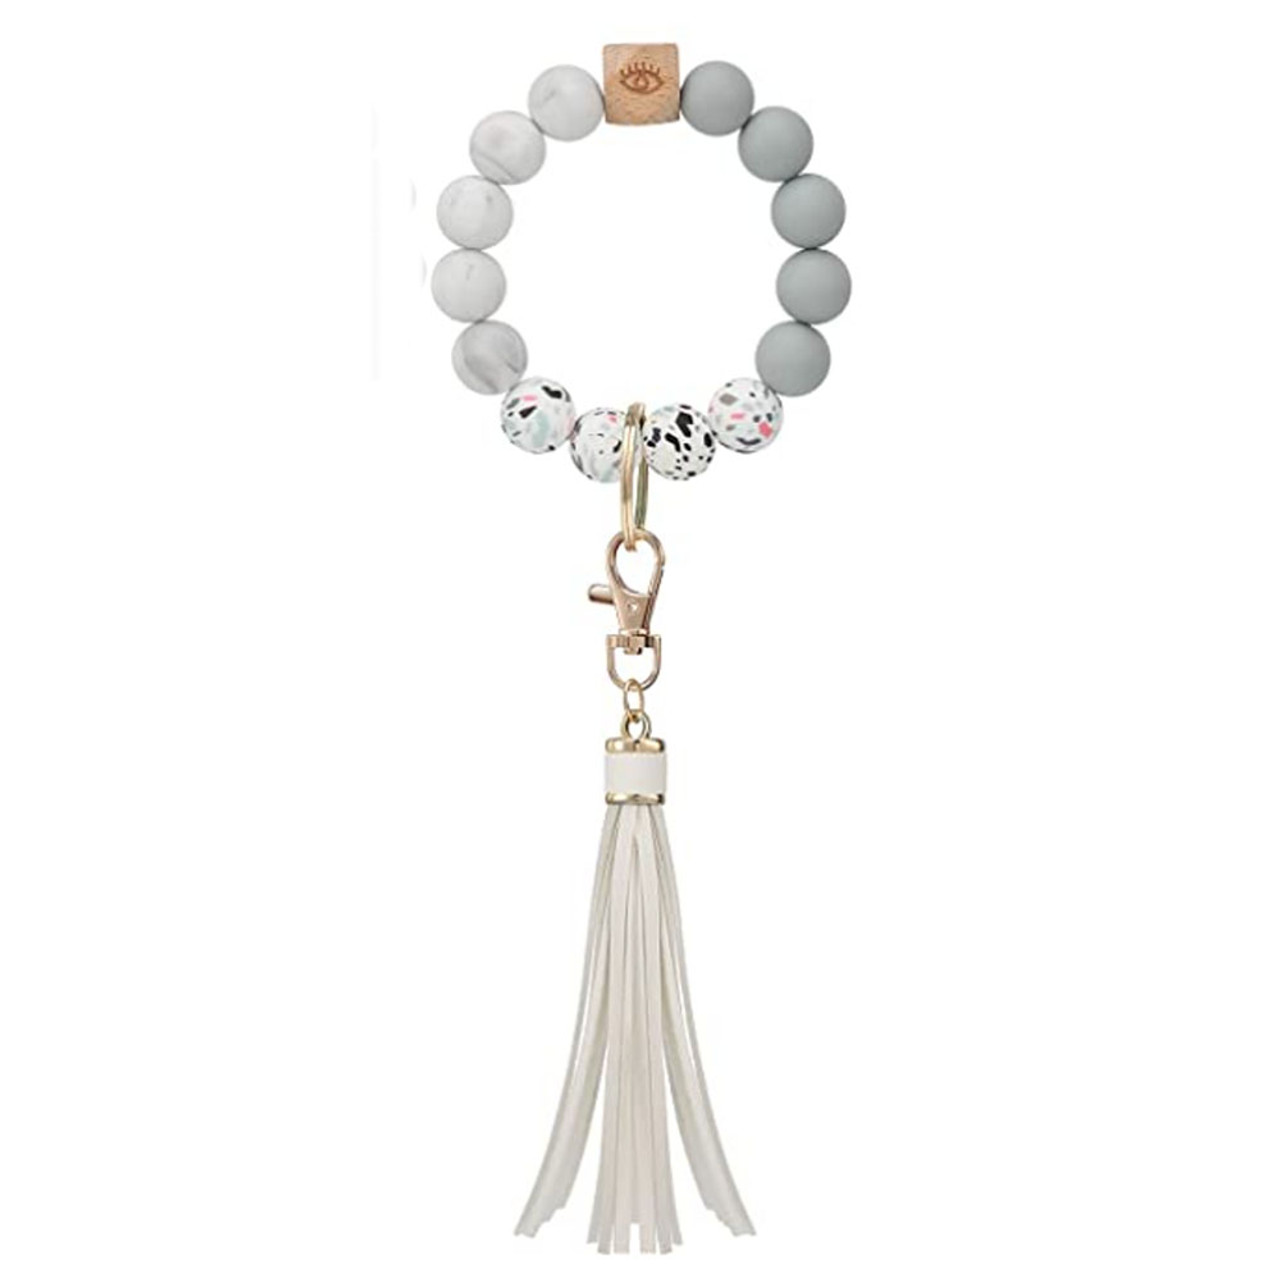 Stretchy Beaded Wristlet Keychain with Tassel product image